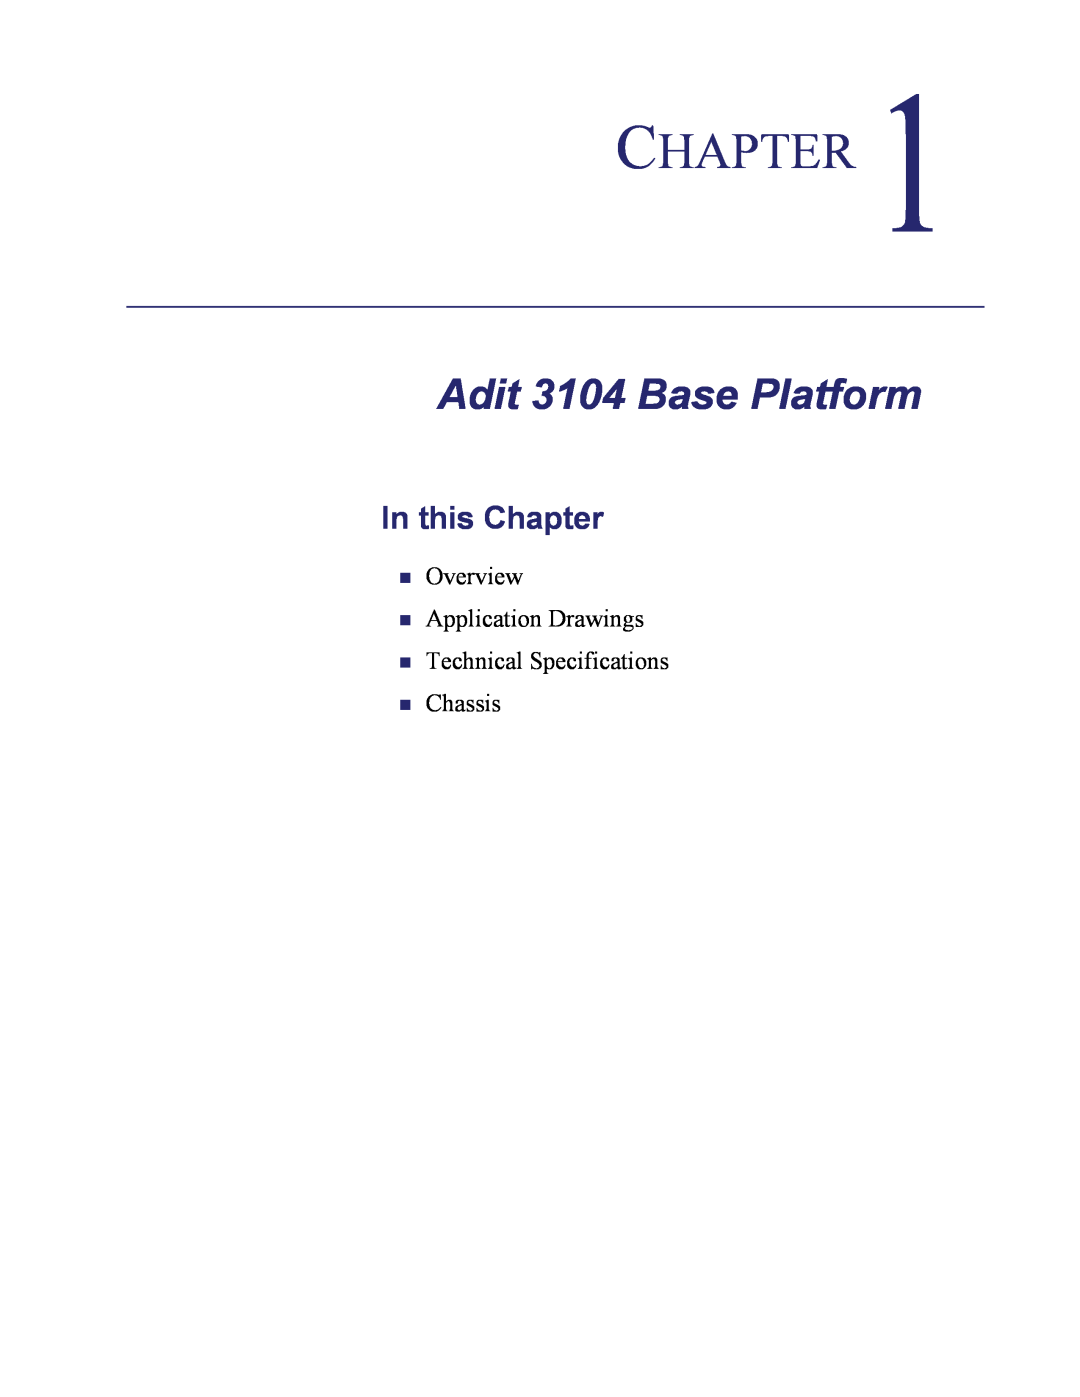 Carrier Access user manual Adit 3104 Base Platform, In this Chapter 